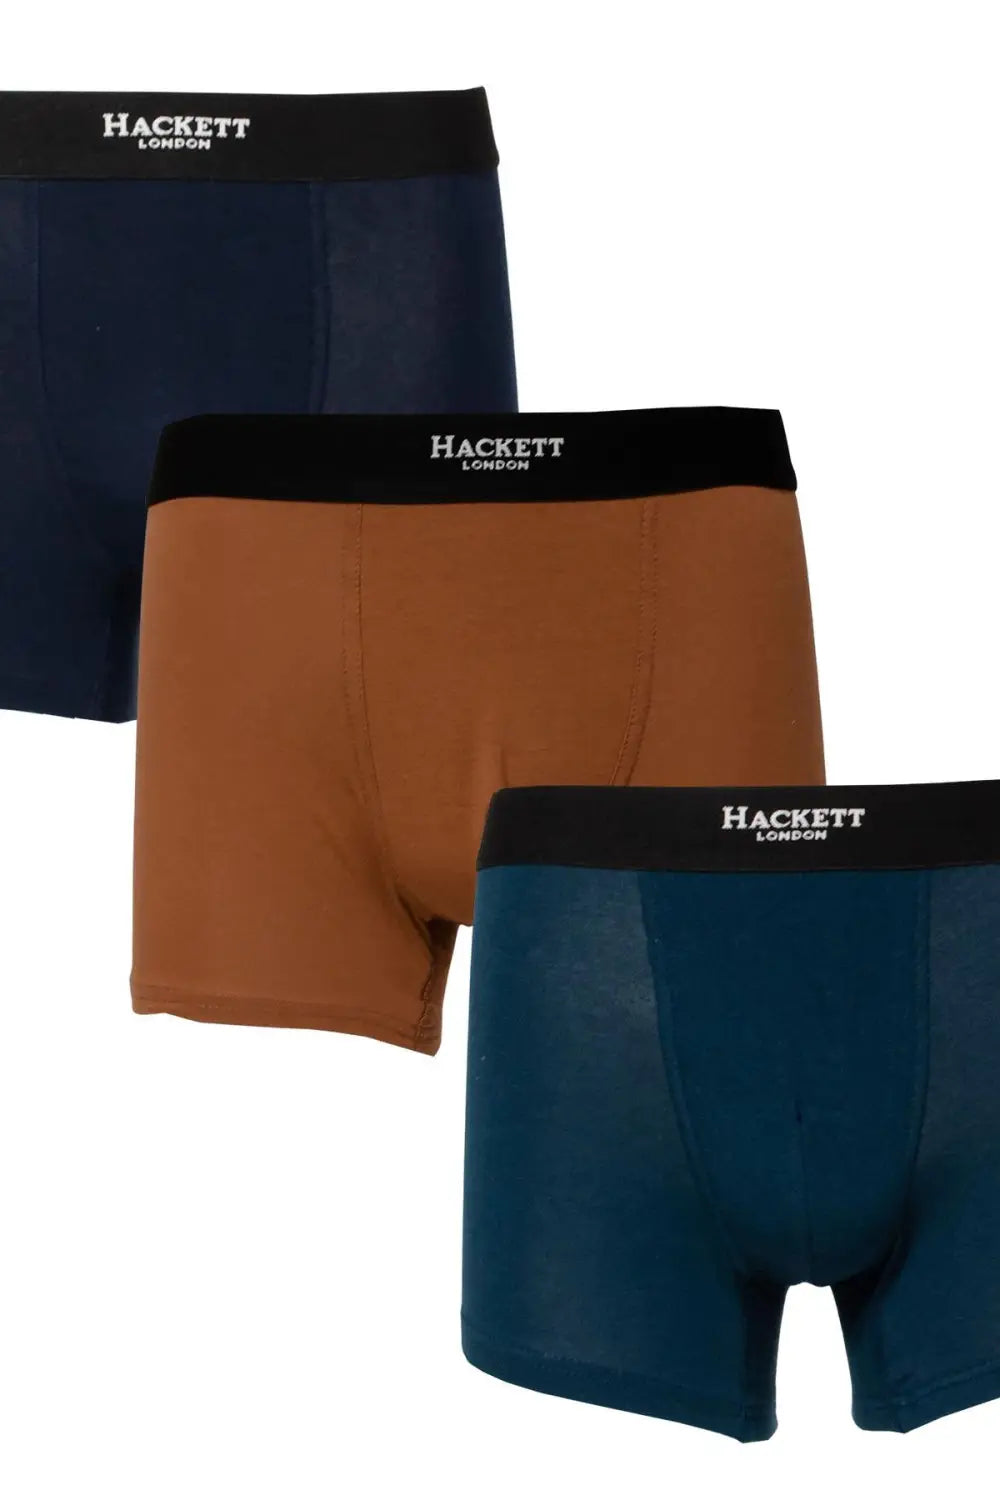 Hackett Jersey Boxers 3 Pack